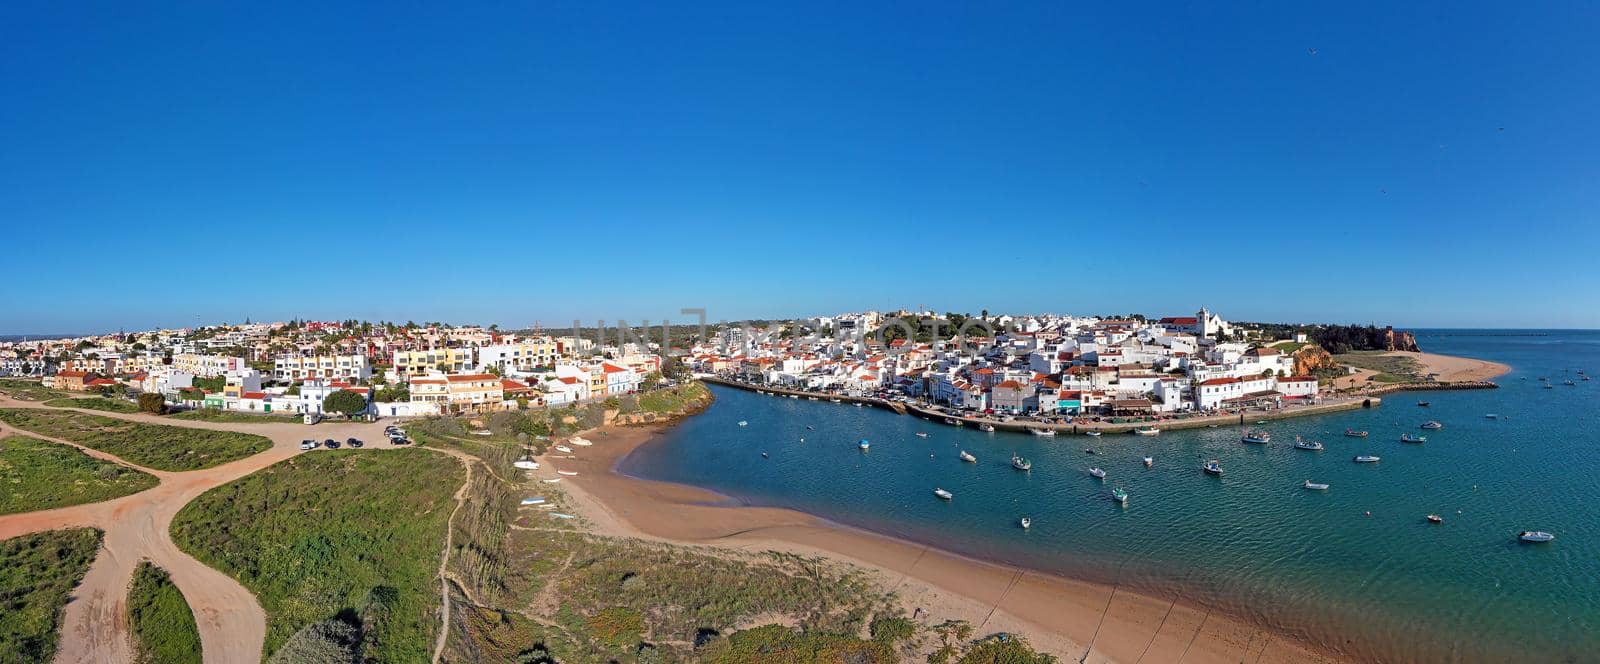 Panorama from the traditional village Ferragudo in the Algarve Portugal by devy